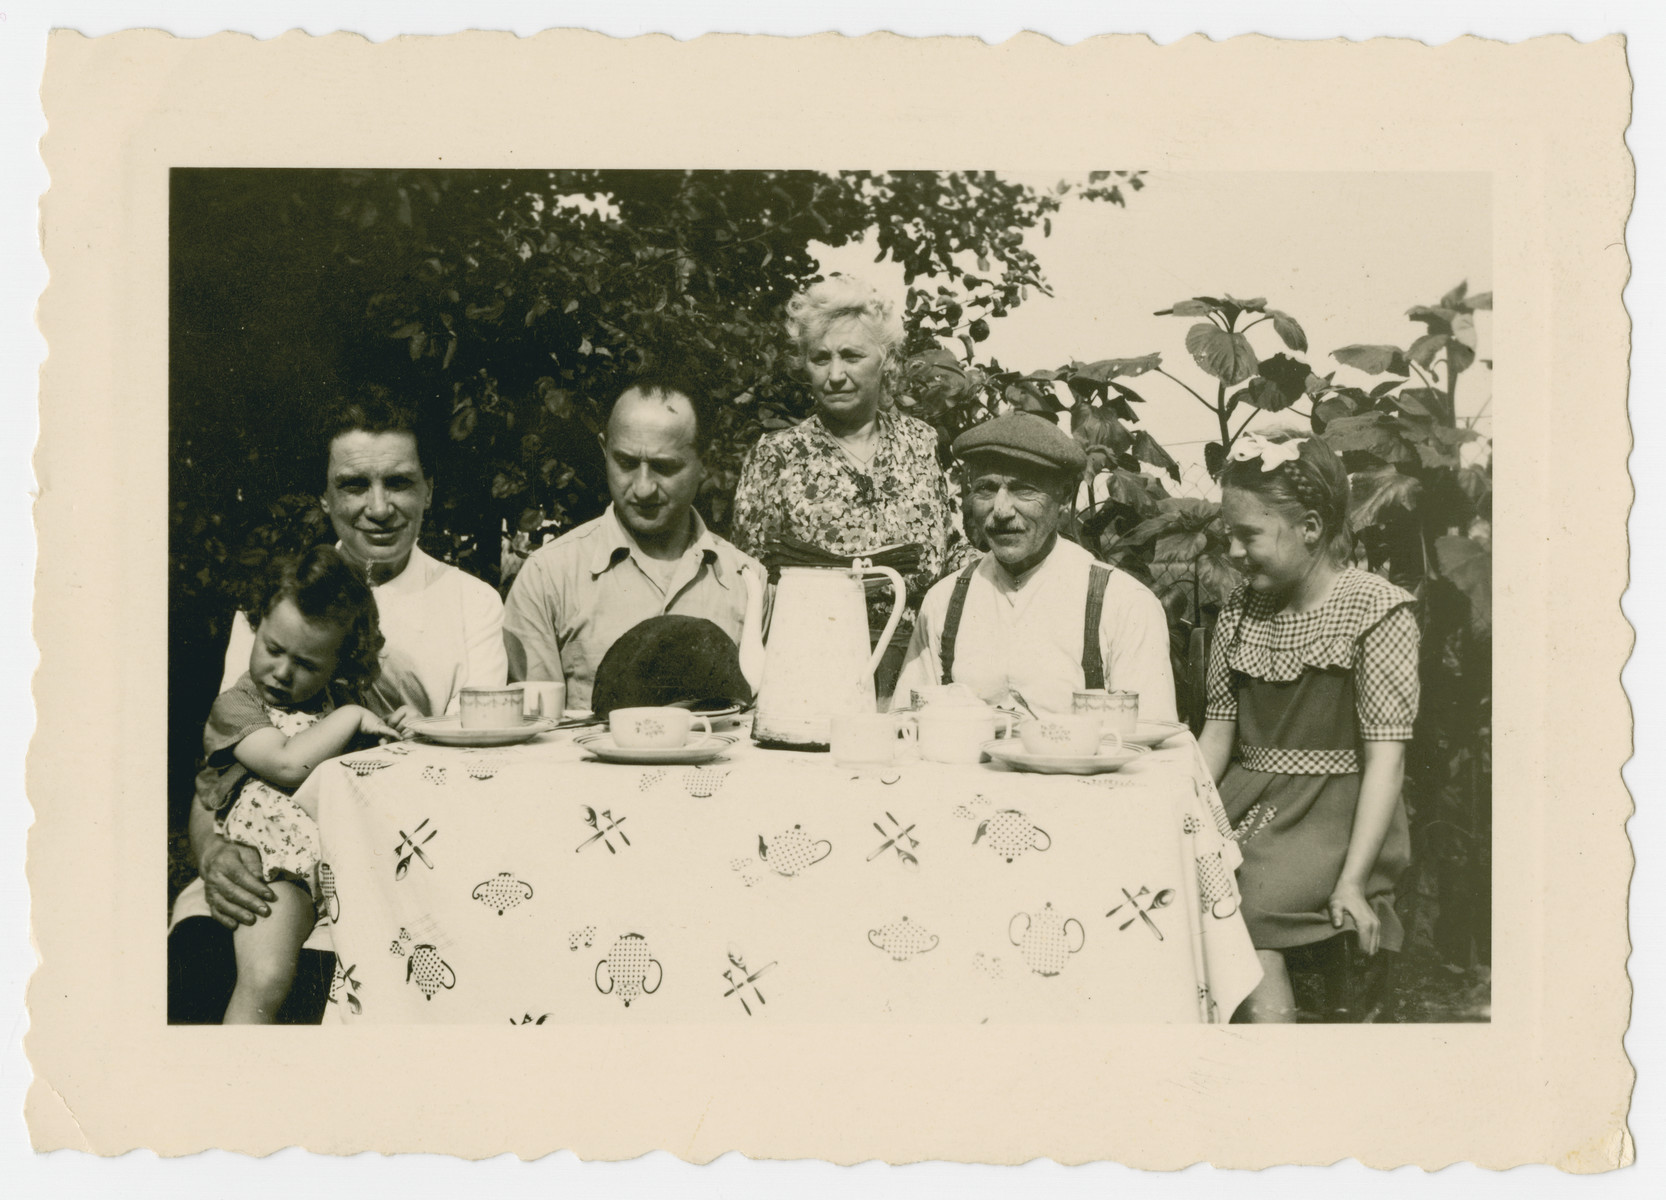 Shirley Gola sits at a table with her rescuers and family while in hiding.

Shirley Gola is seated on the lap of her rescuer Marie Fannes. Her father Joseph Gola is seated next to her.  Marrein, her godmother is standing next to her husband Monsieur Mal.  Their young niece is seated on the left.